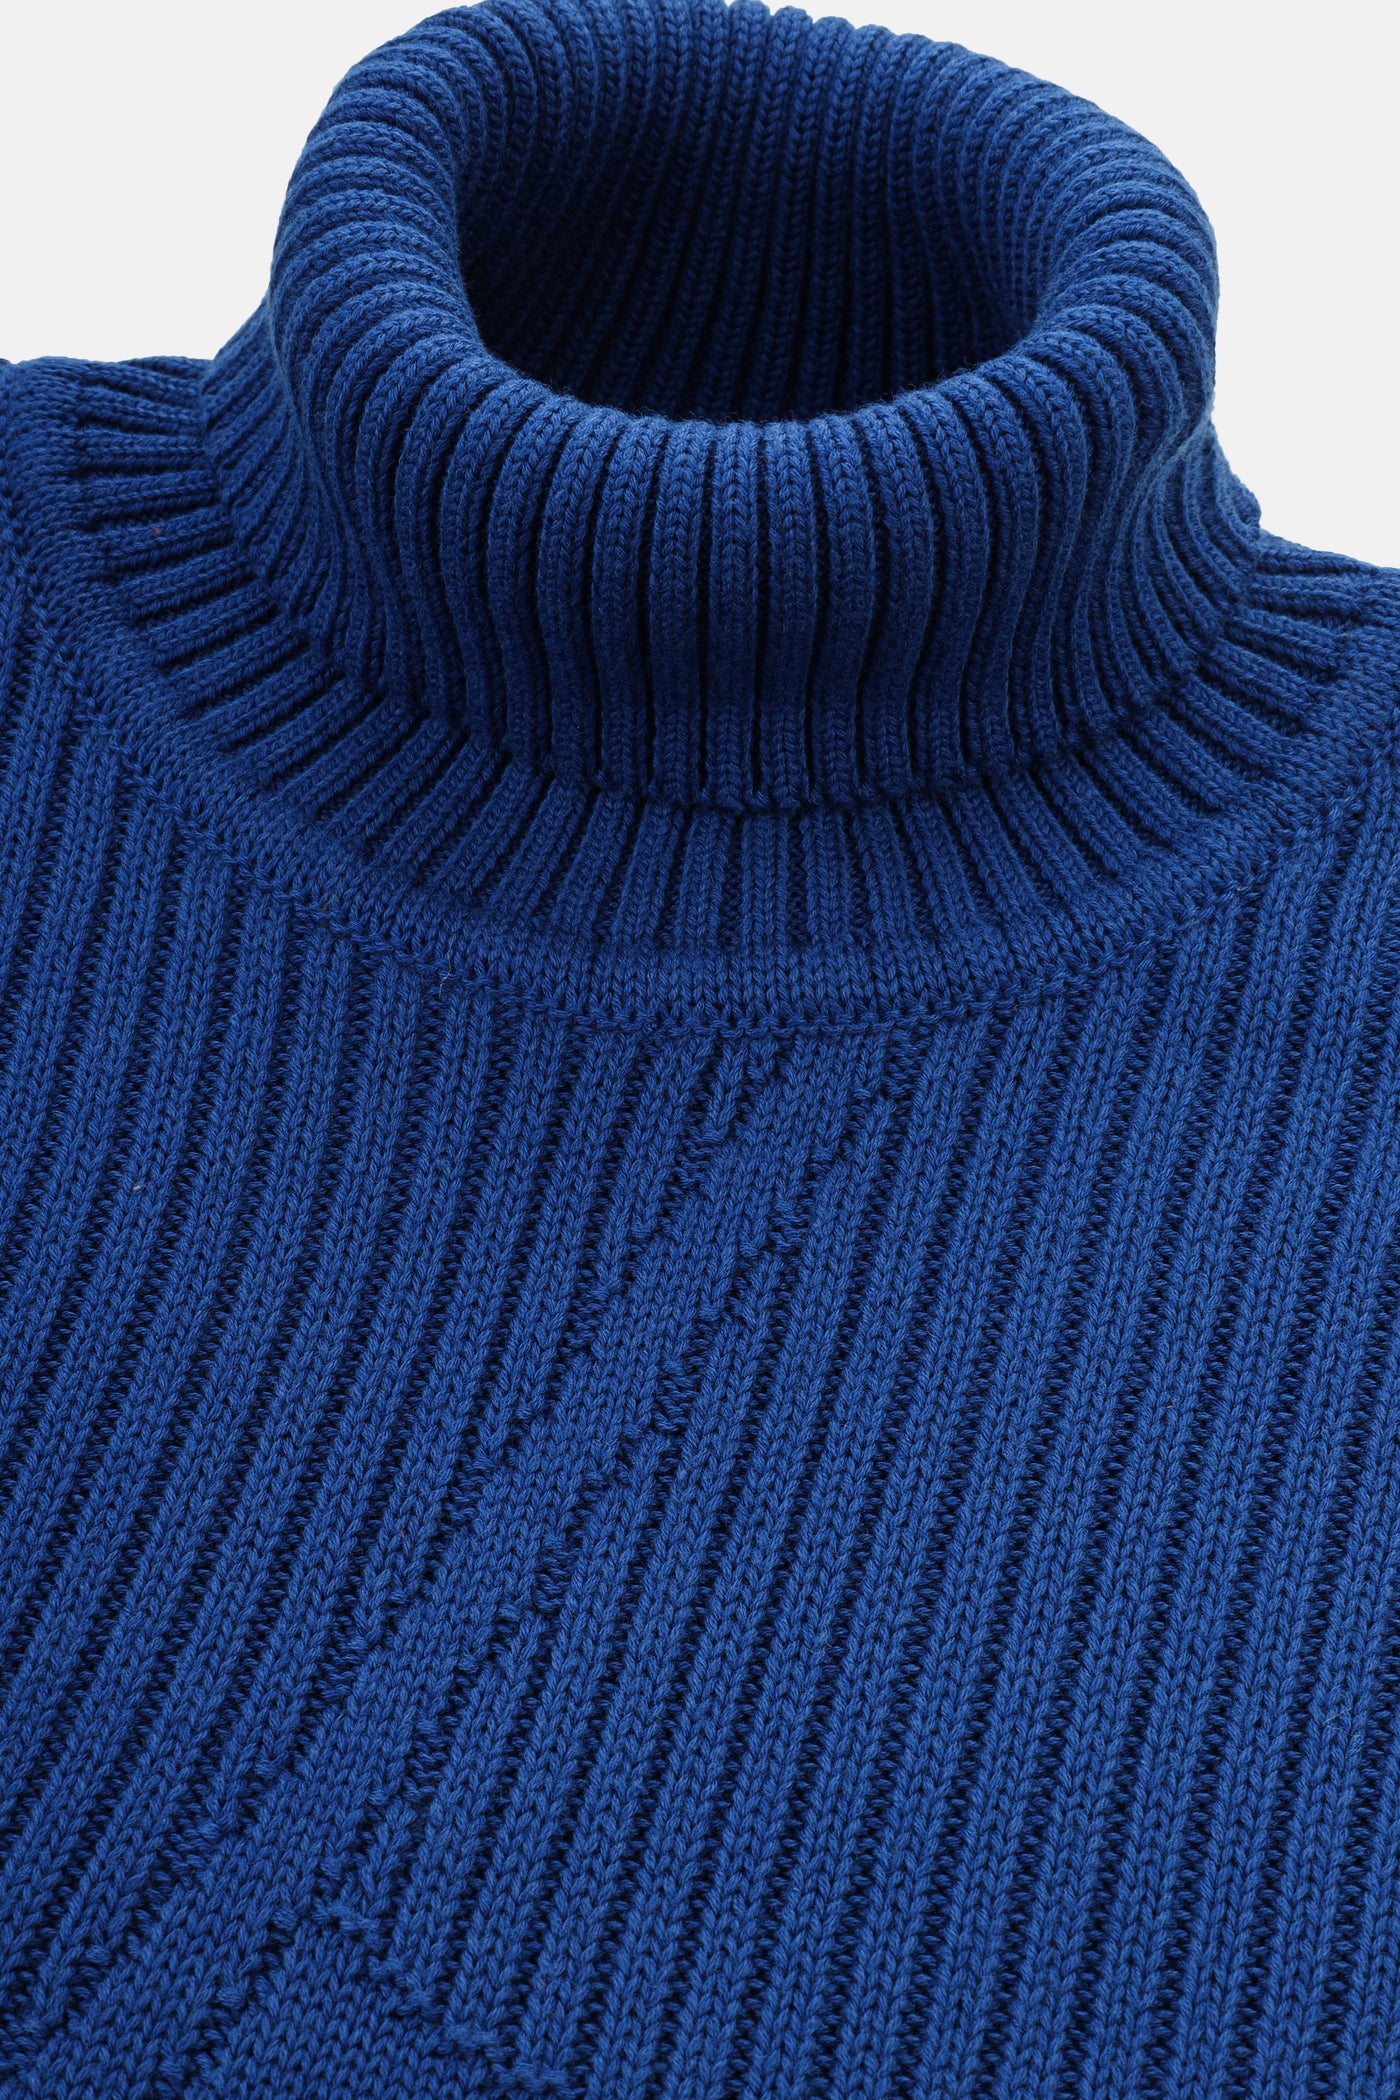 Jacquard Knitted High-neck Byzantine Blue Pullover